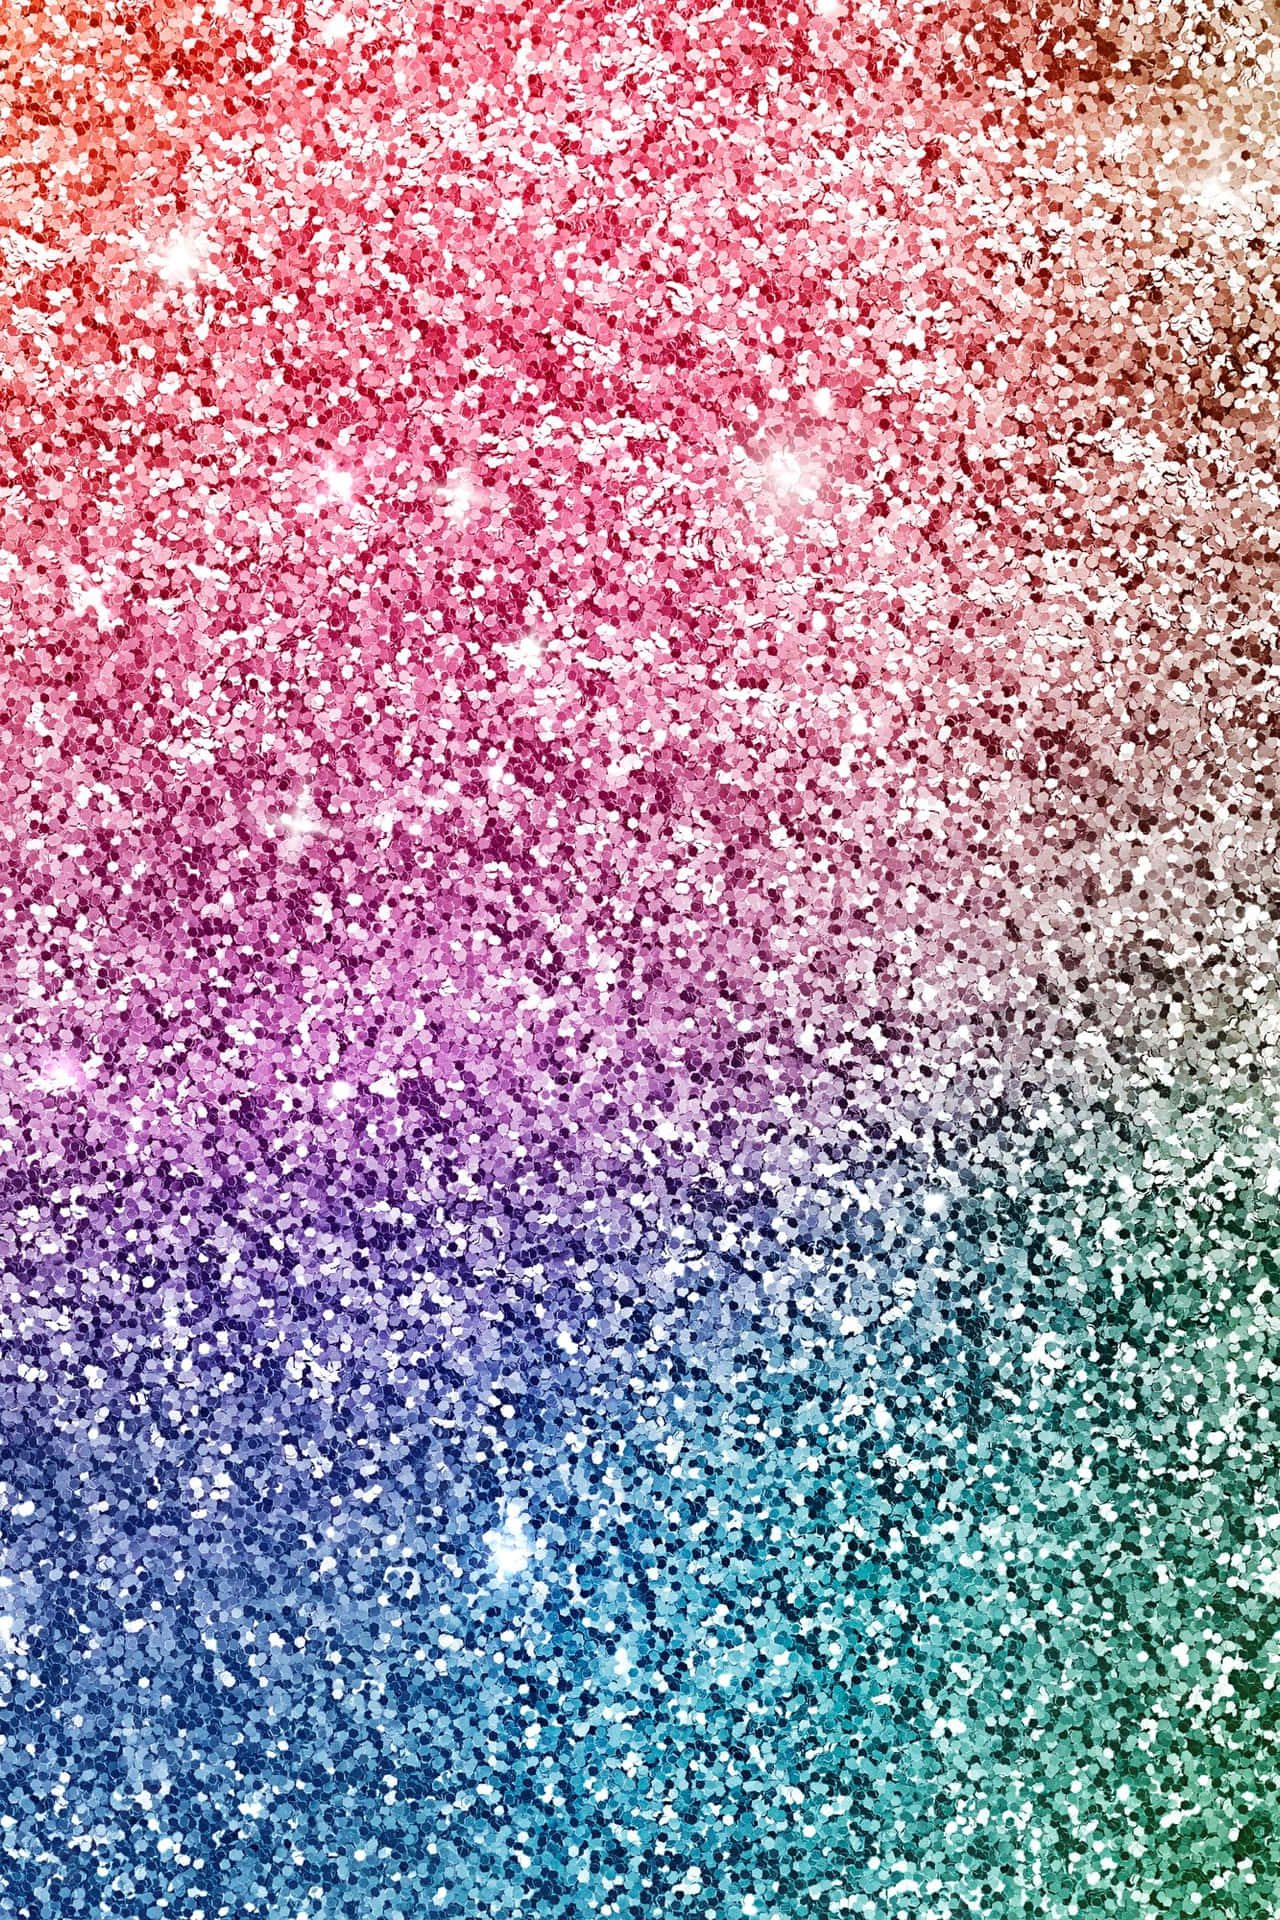 A stunning, colorful sparkling glittery background